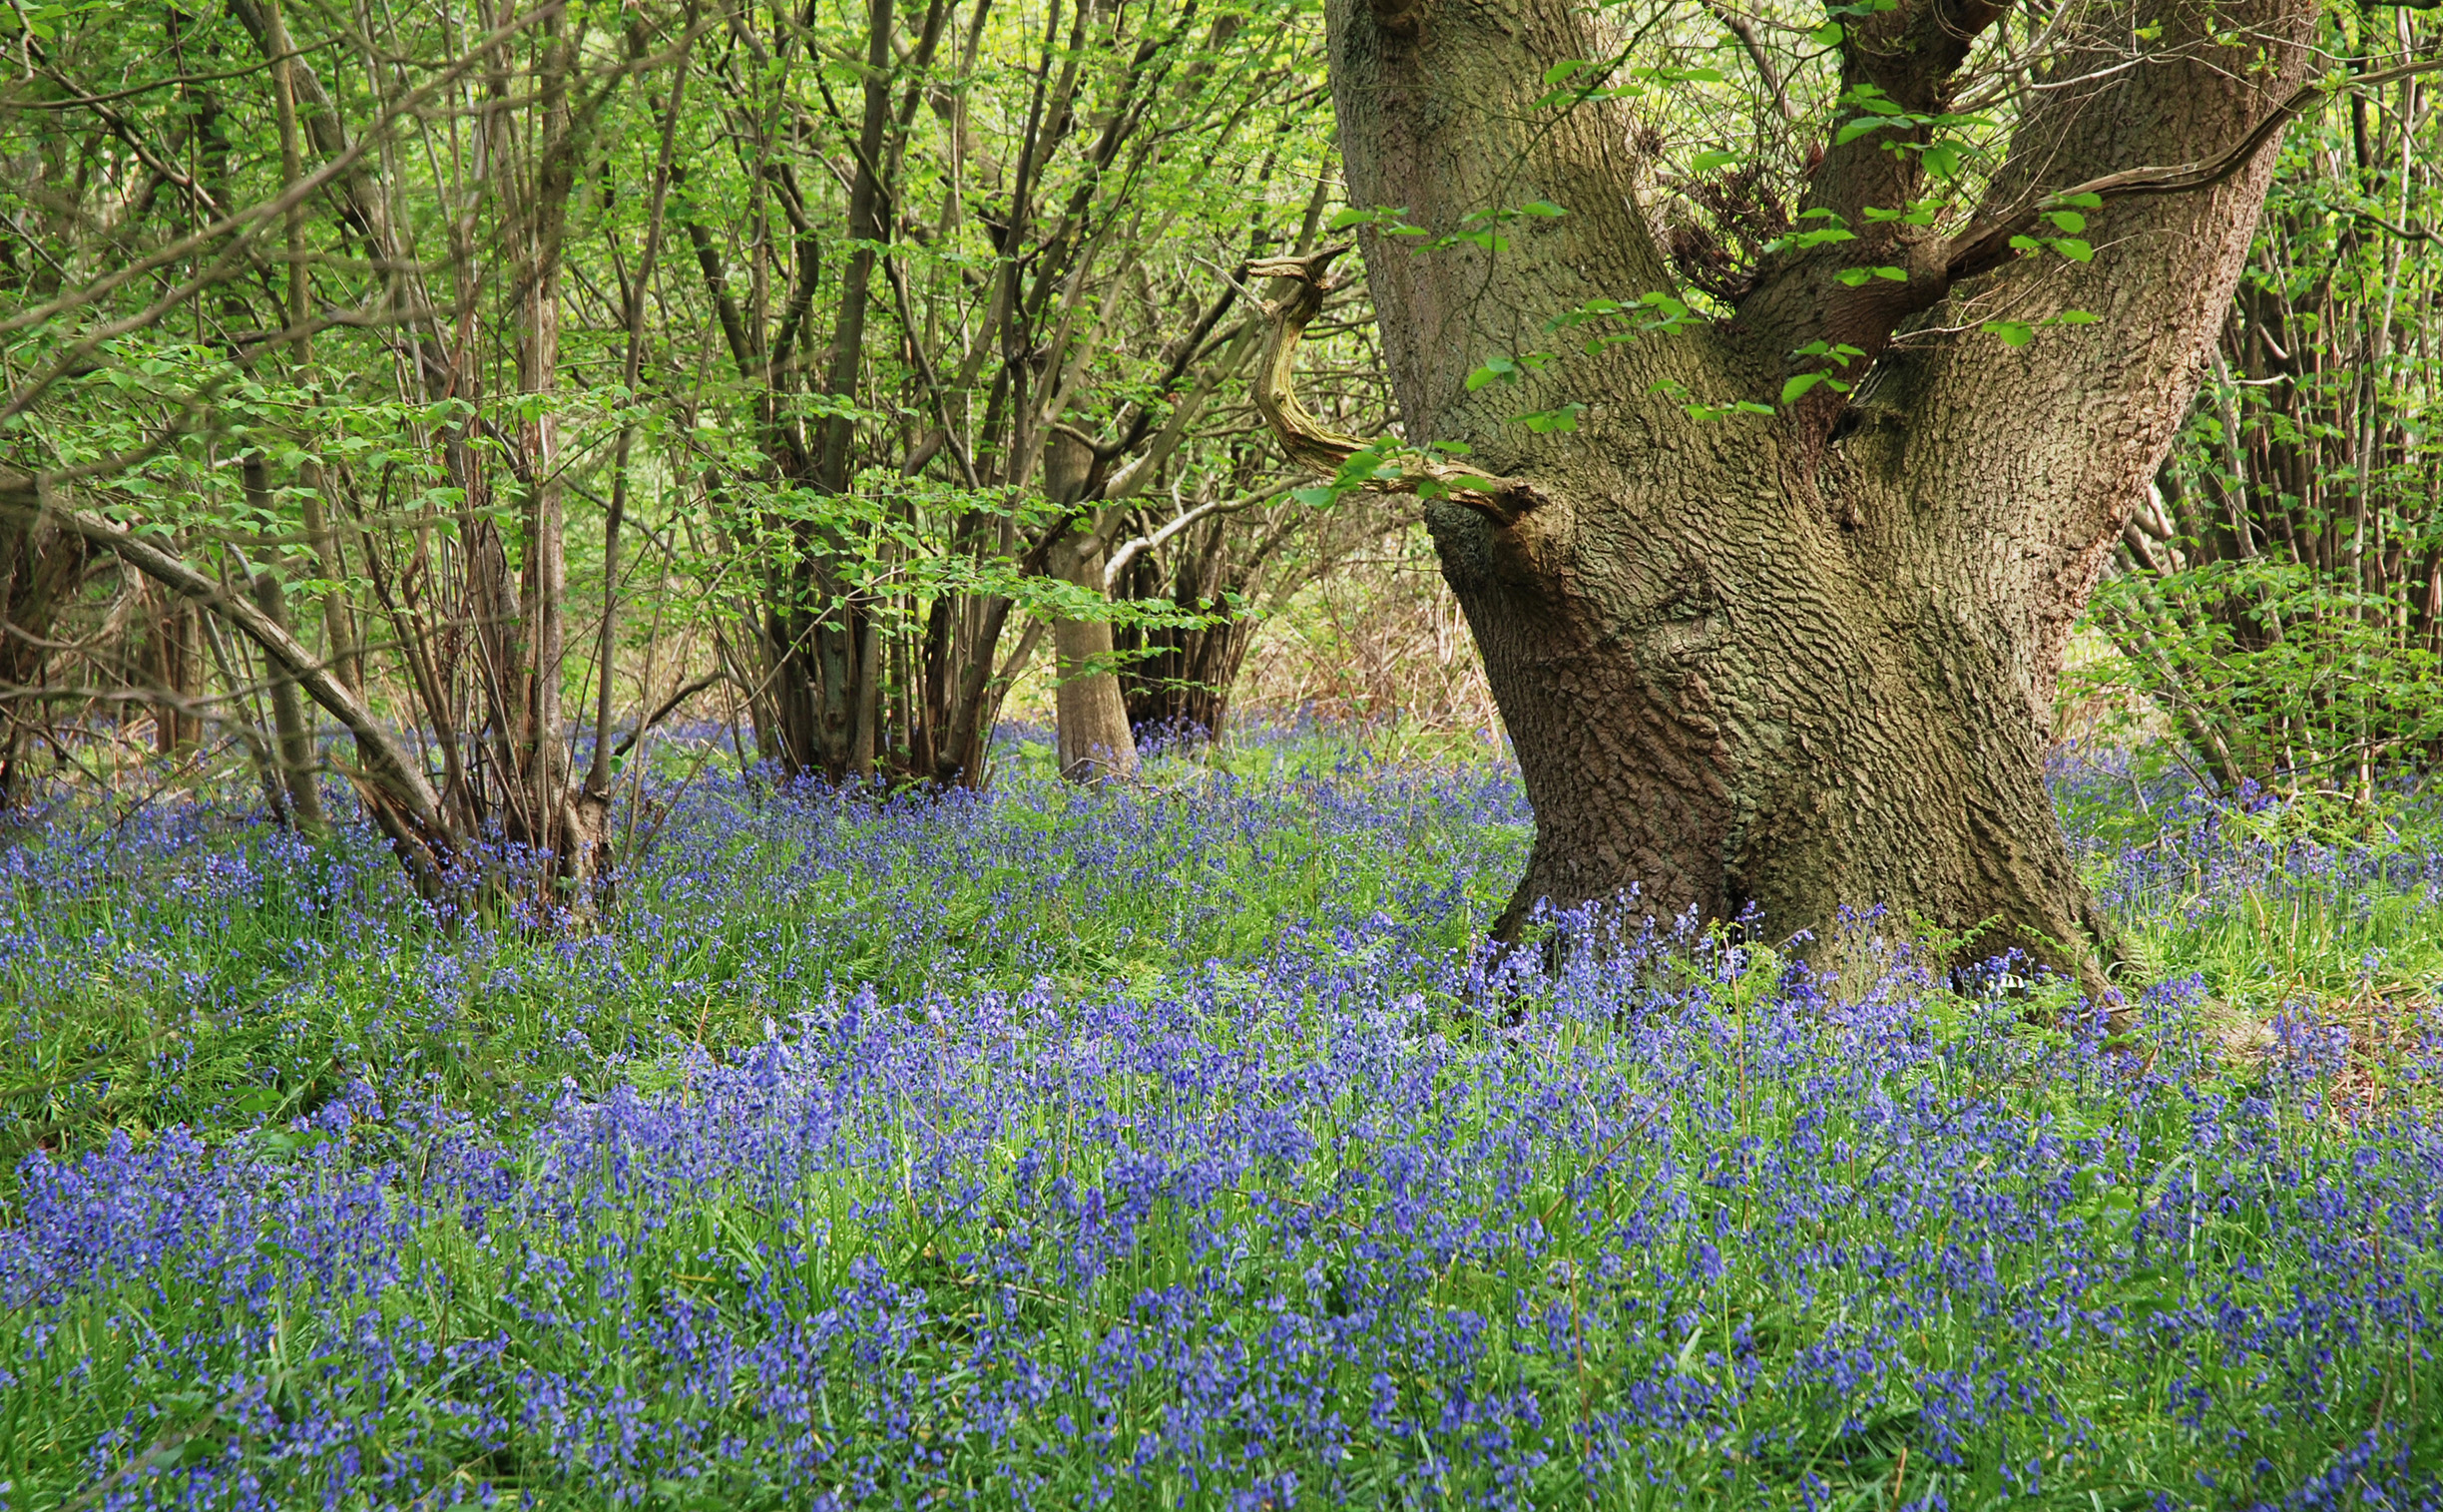 A mass of bluebell flowers carpets the ground of this English woodland. The trees have many stems and their green leaves spread above the flowers.